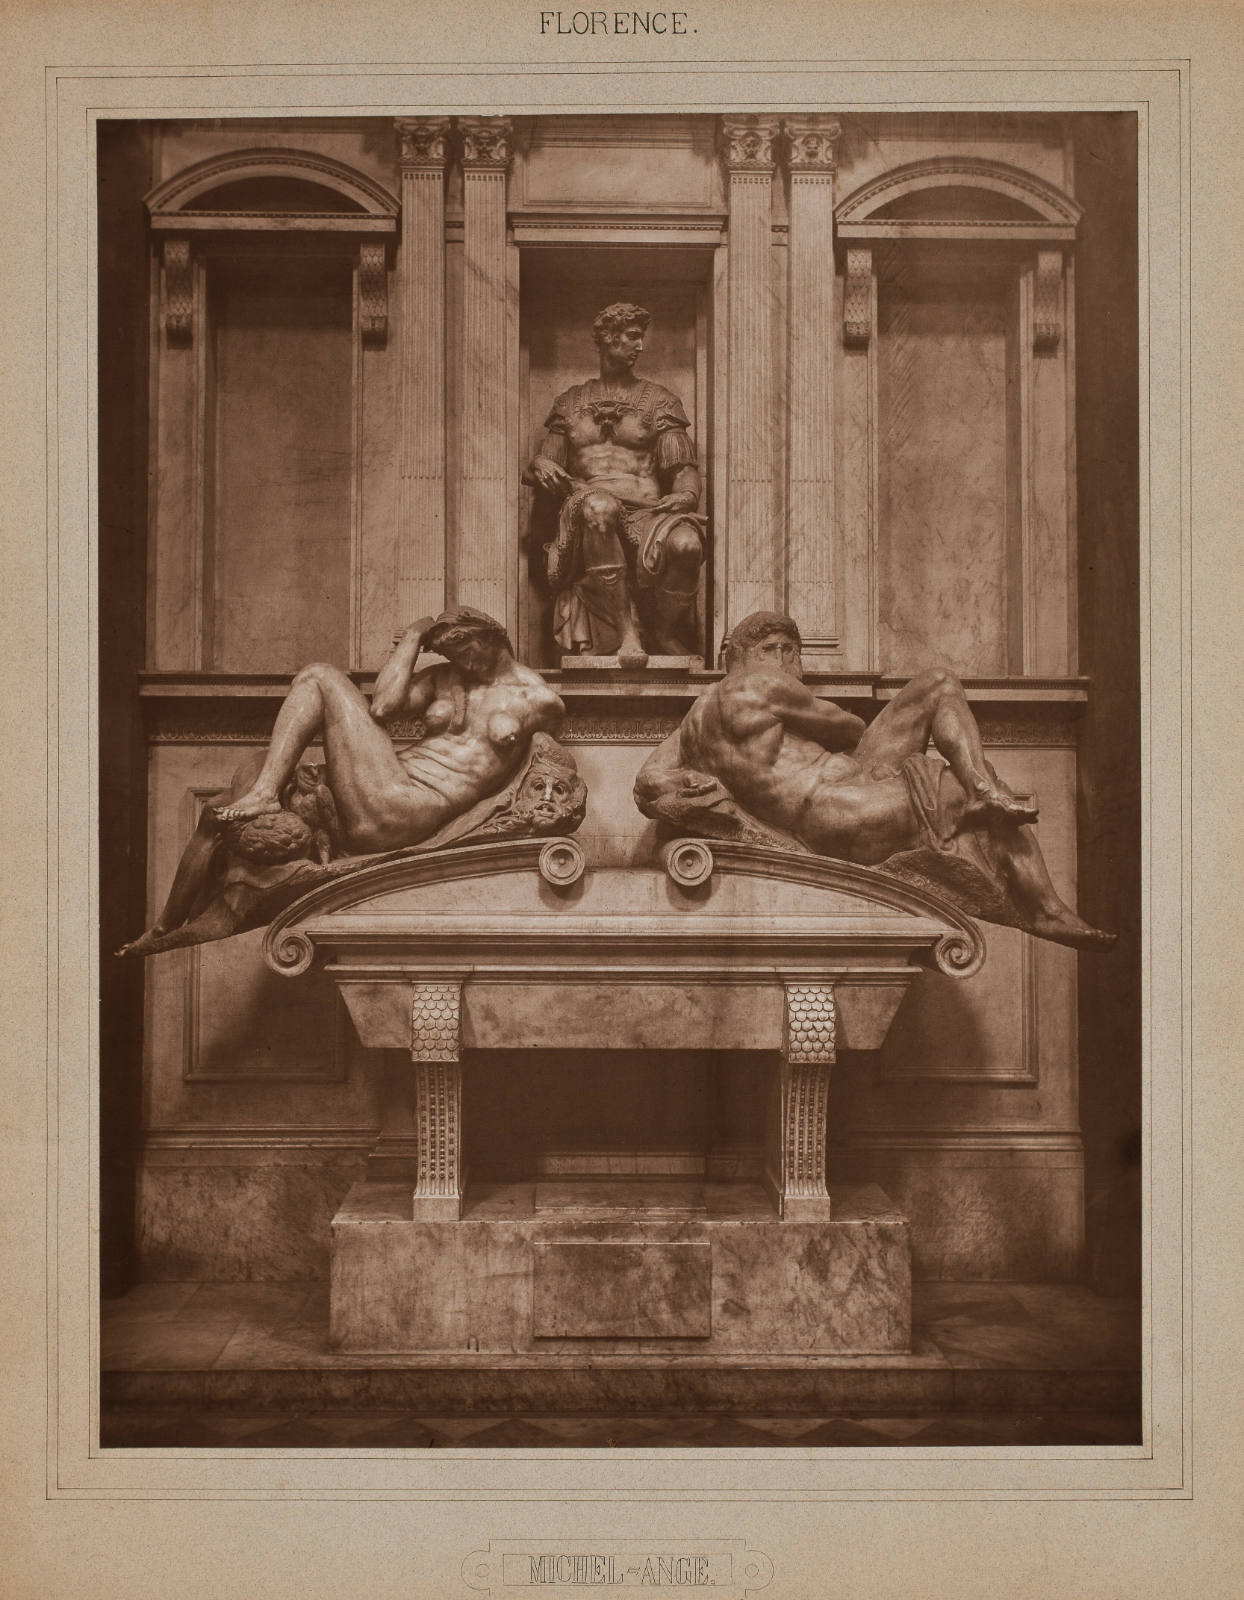 Florence, Michel-Ange (Tomb of Giuliano de Medici, Florence, by Michelangelo)